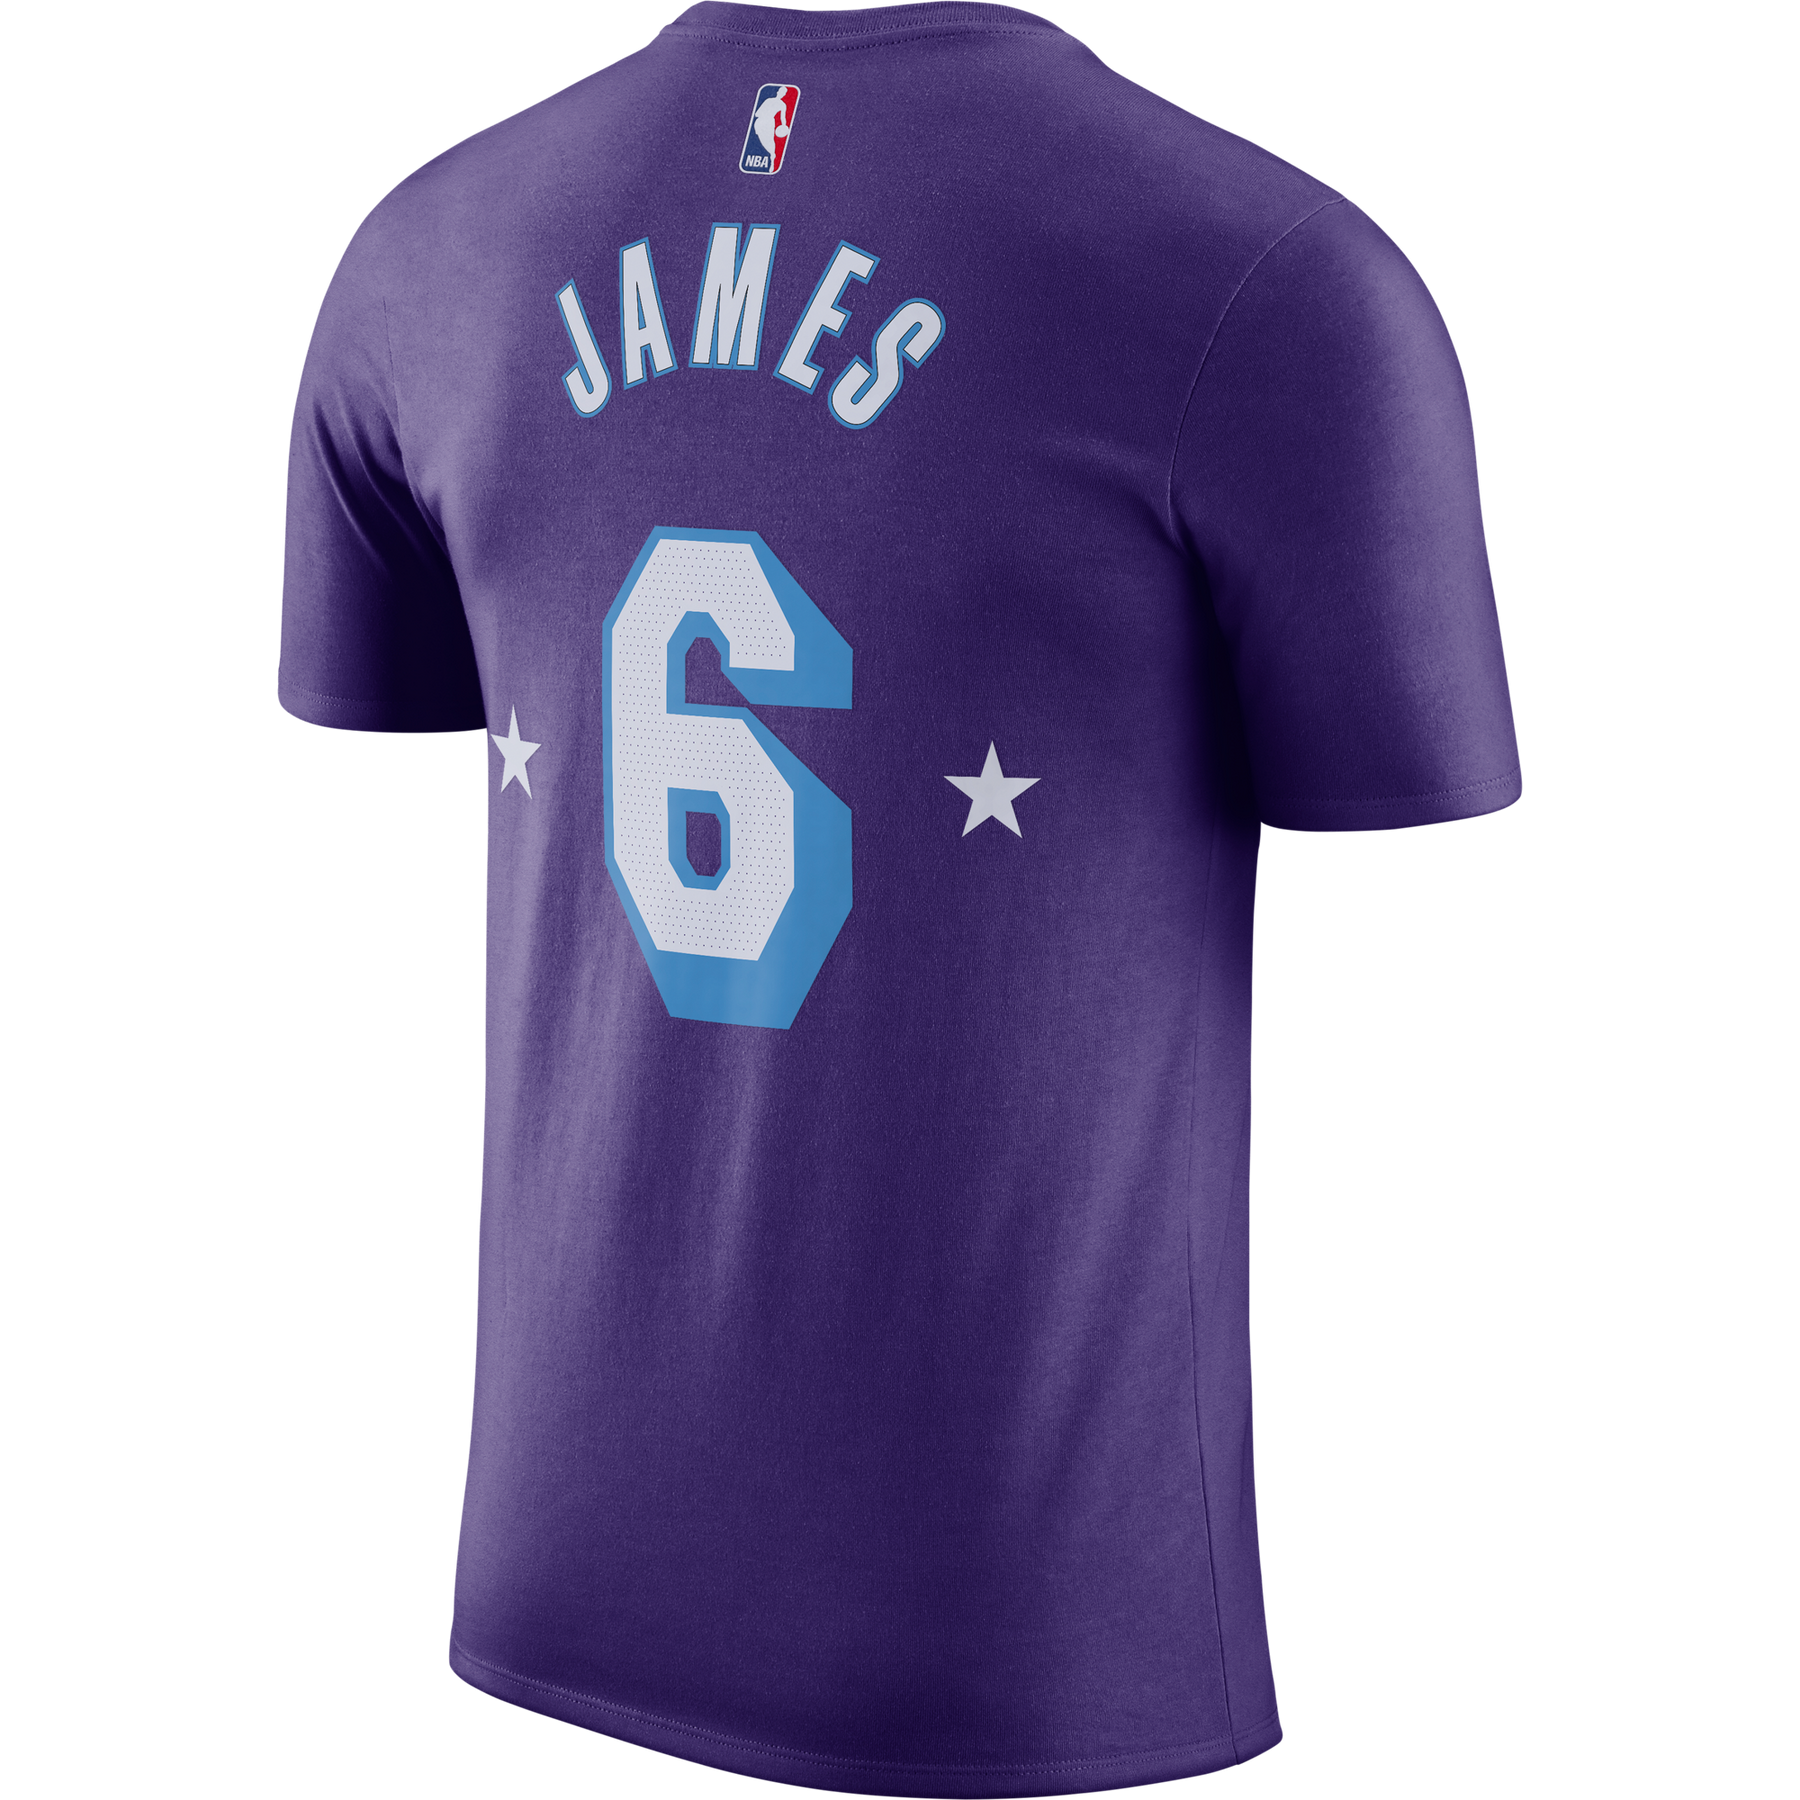 LeBron James Lakers jerseys and t-shirts now available 